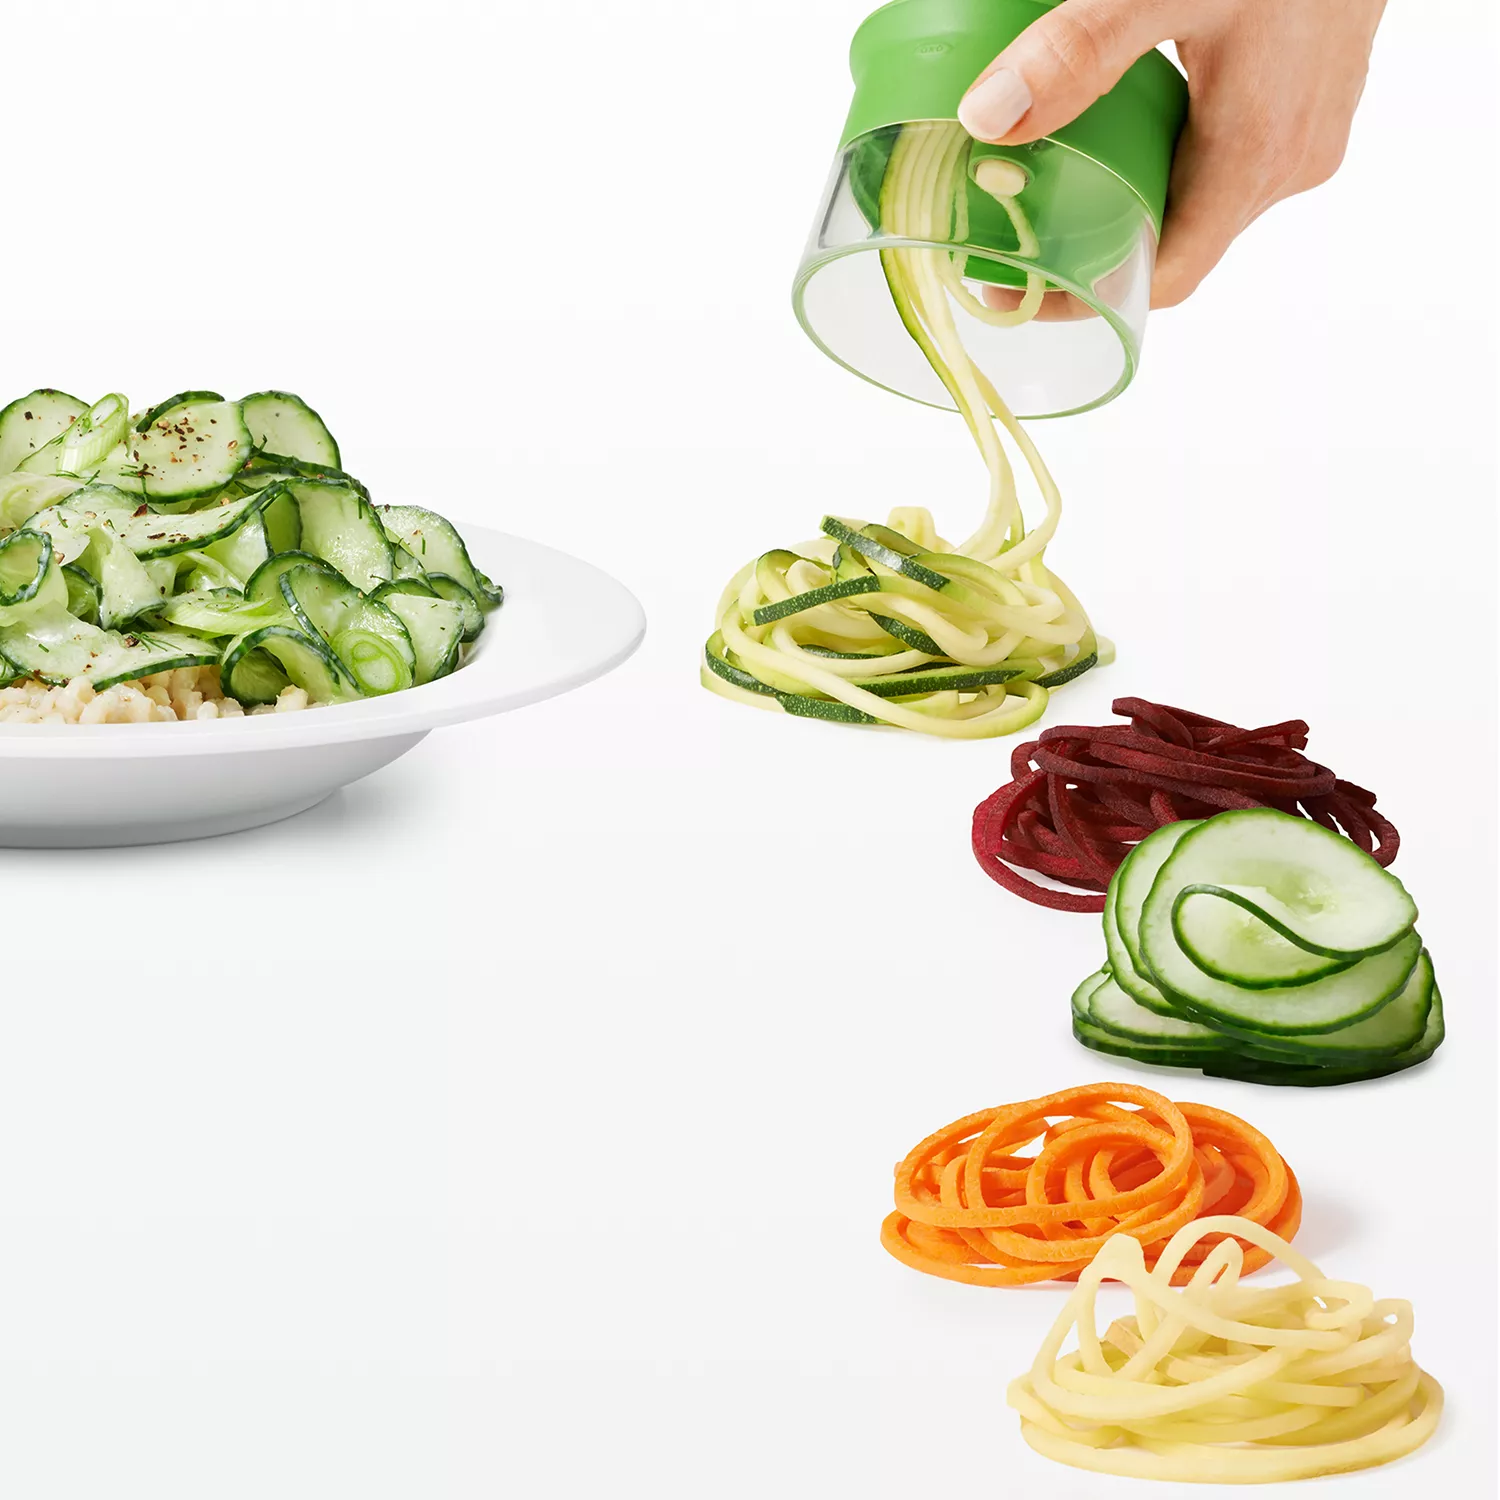 OXO's Good Grips 3-Blade Hand-Held Spiralizer, Reviewed